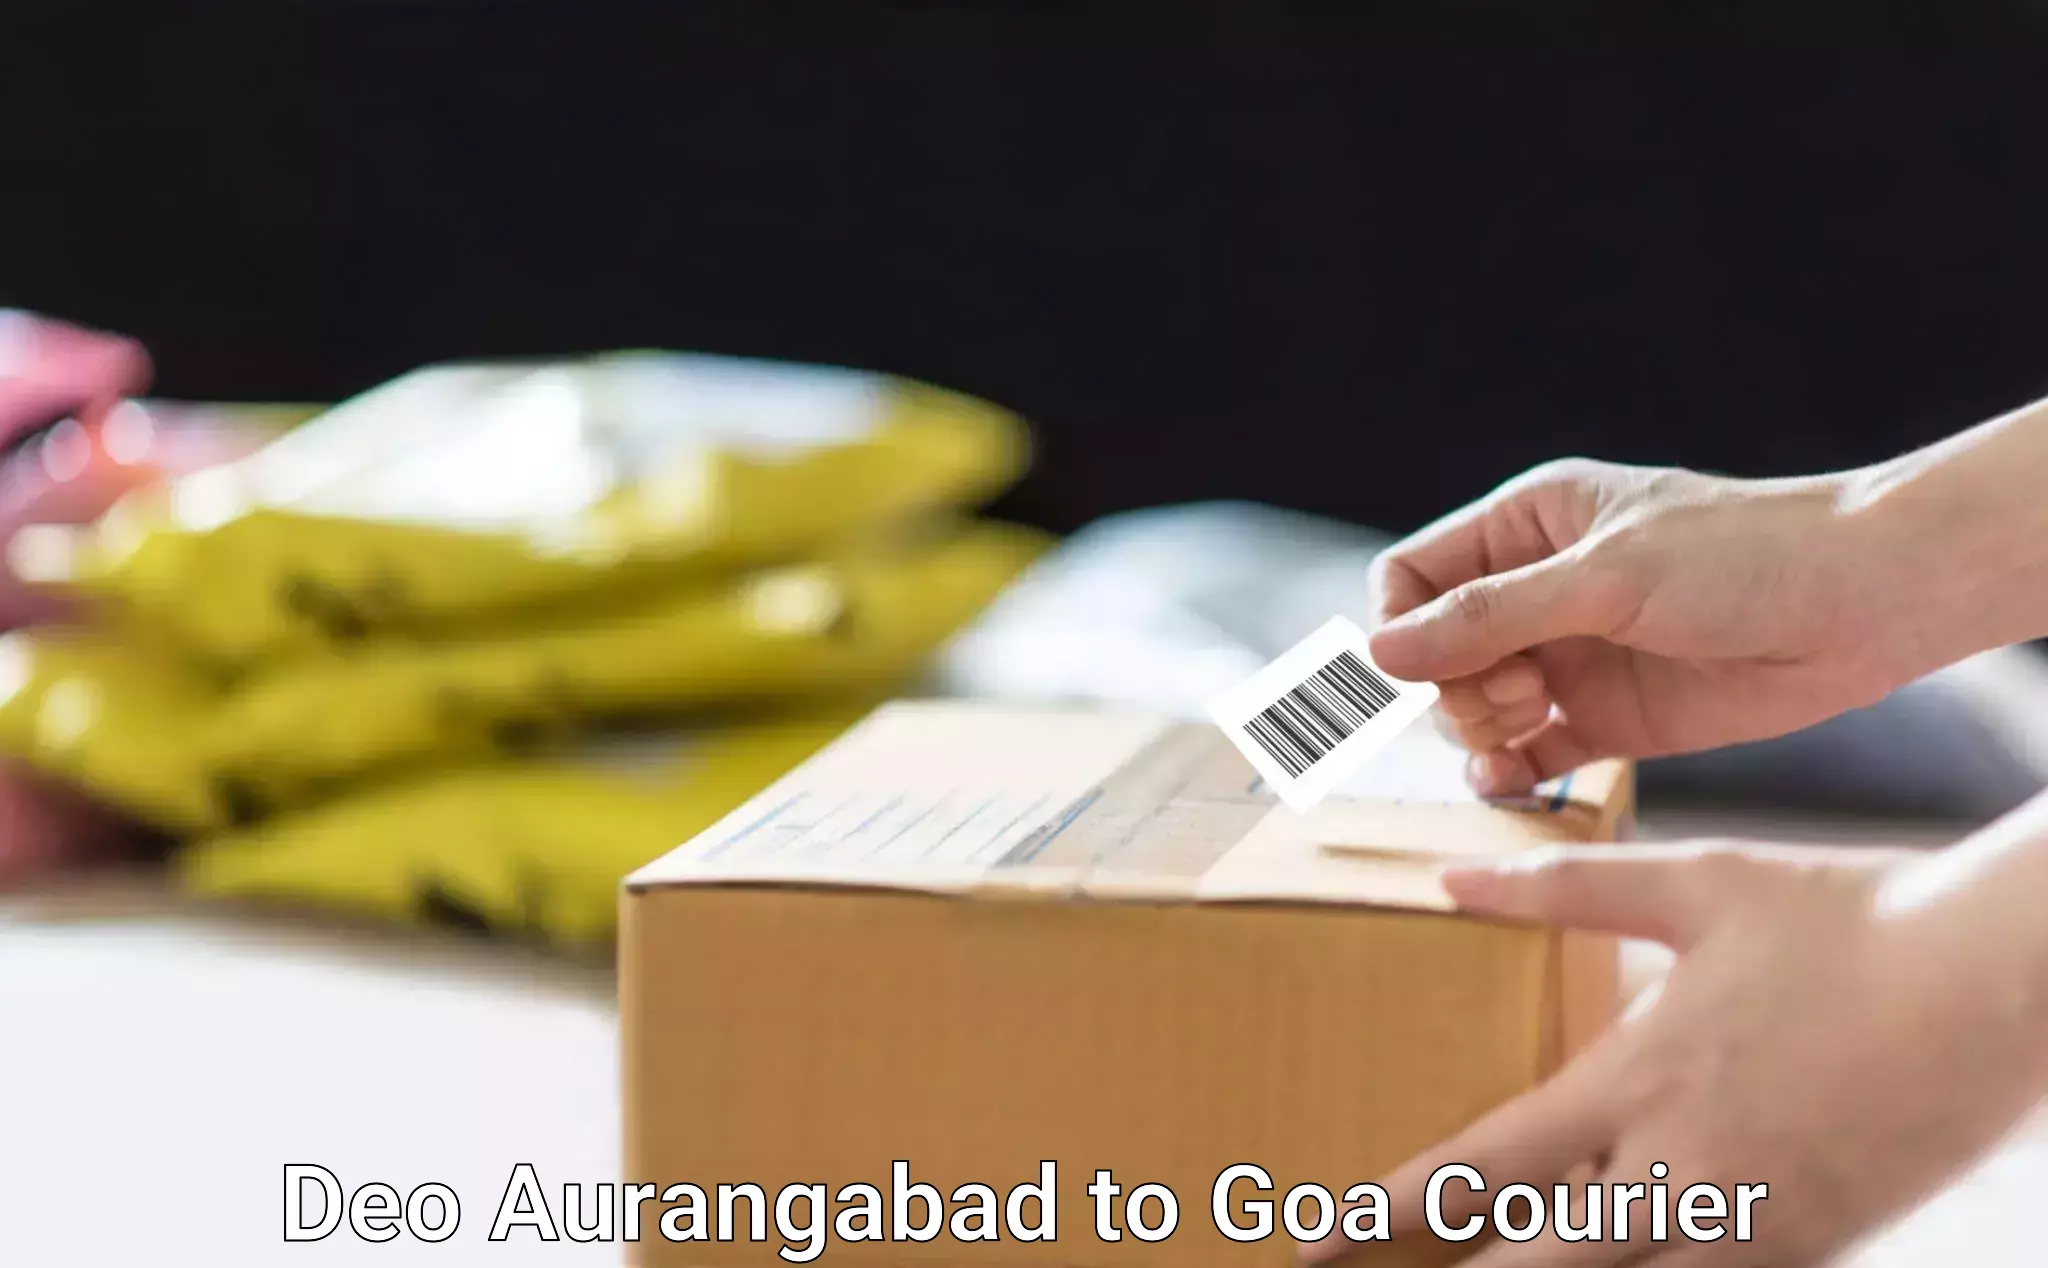 Reliable relocation services Deo Aurangabad to South Goa